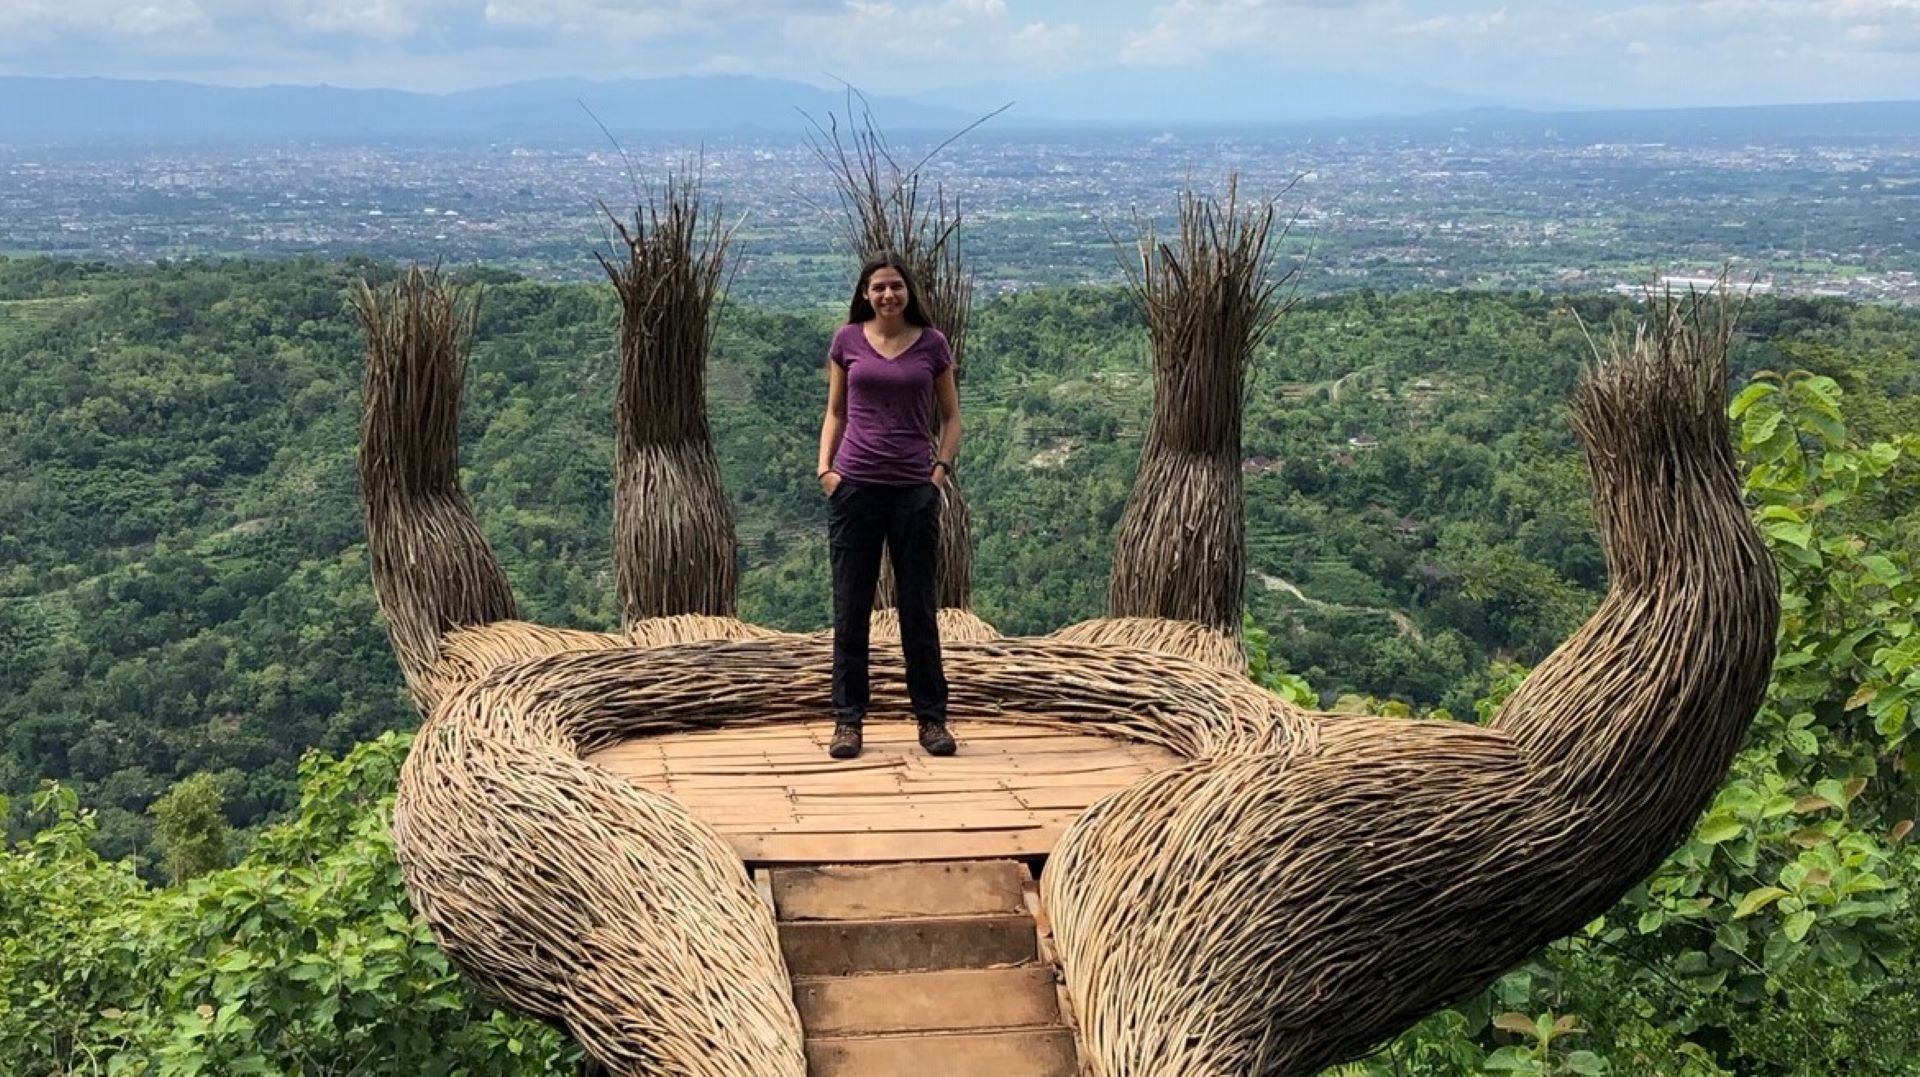 Doctoral student Angela Achorn stands in the middle of a woven wooden structure overlooking an expanse of trees.